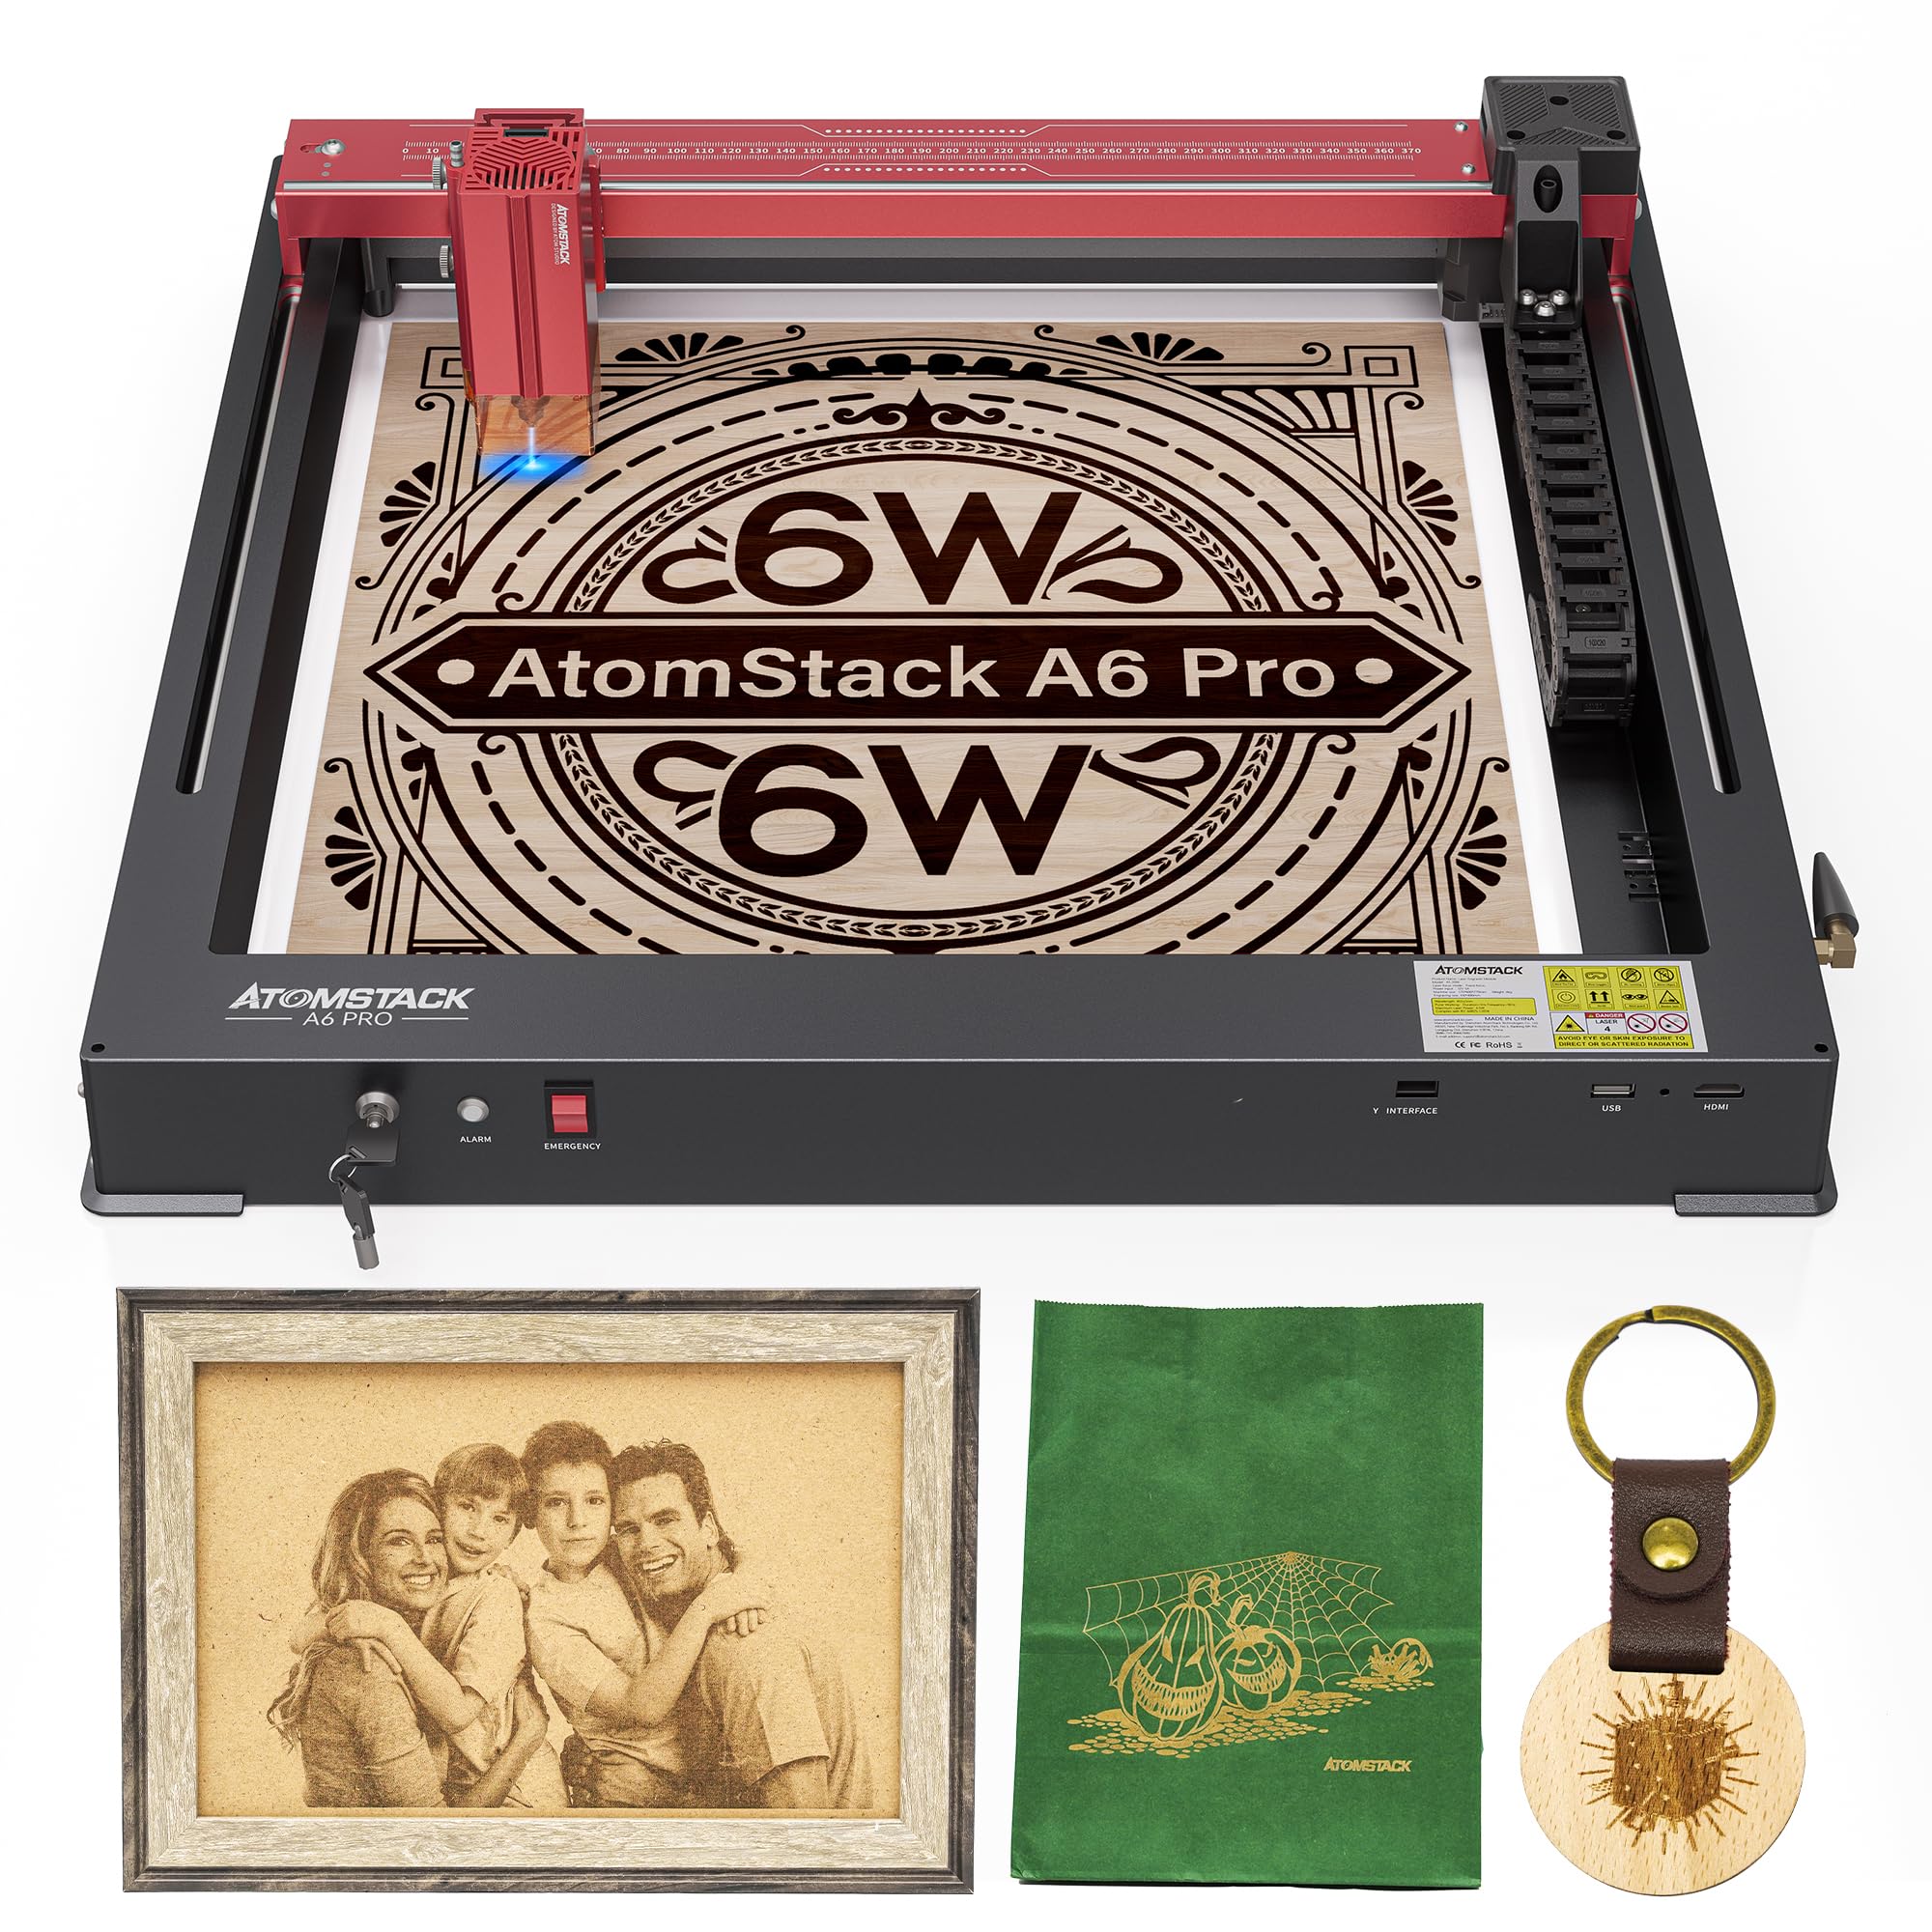 ATOMSTACK A6 Pro 40W Laser Engraving Machine 6W Output Power 600mm/s Laser Engraver High Speed Armored CNC DIY Cutter Non-Clogging Free Installation